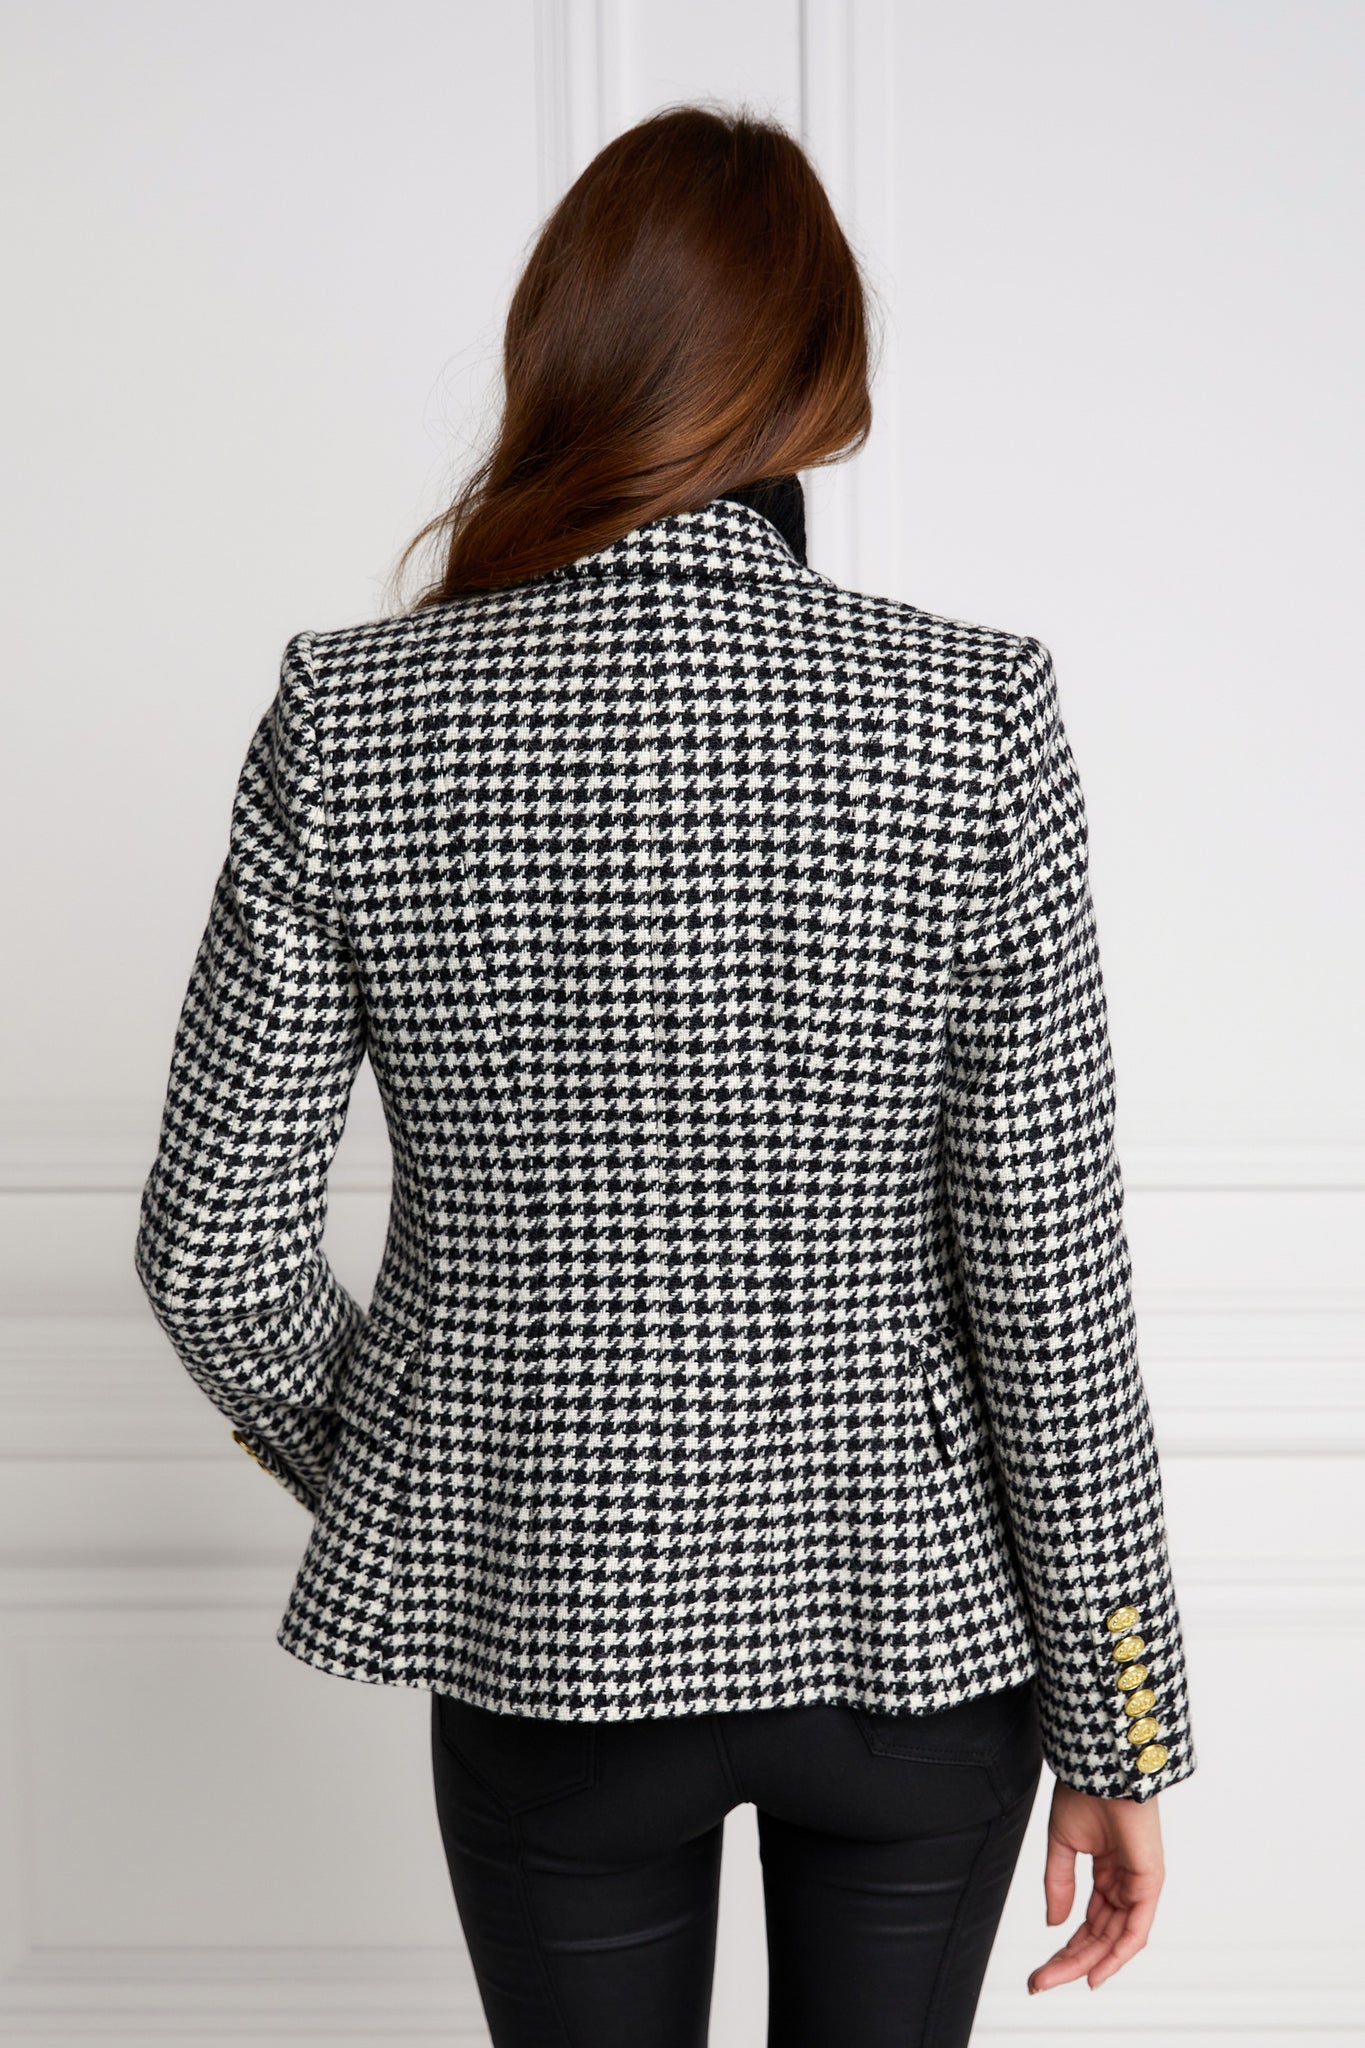 back of British made double breasted blazer that fastens with a single button hole to create a more form fitting silhouette with two pockets and gold button detailing this blazer in black and white houndstooth